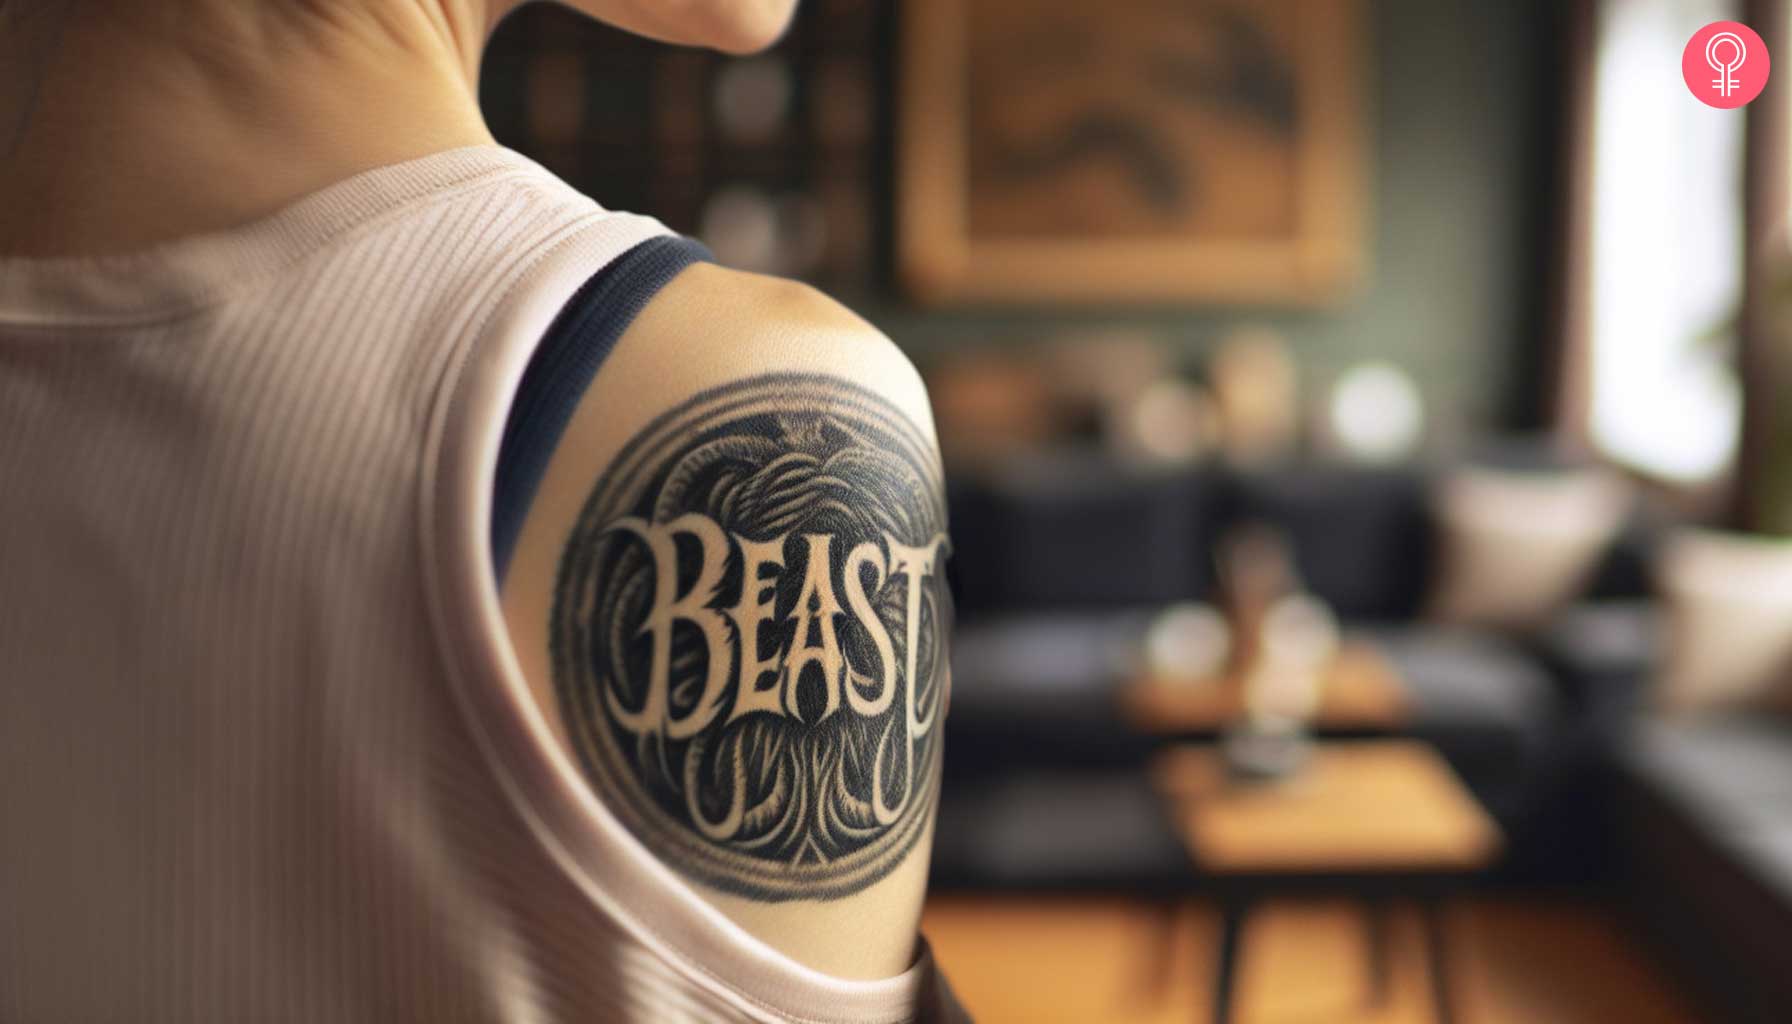 Beast word tattoo on a woman’s shoulder